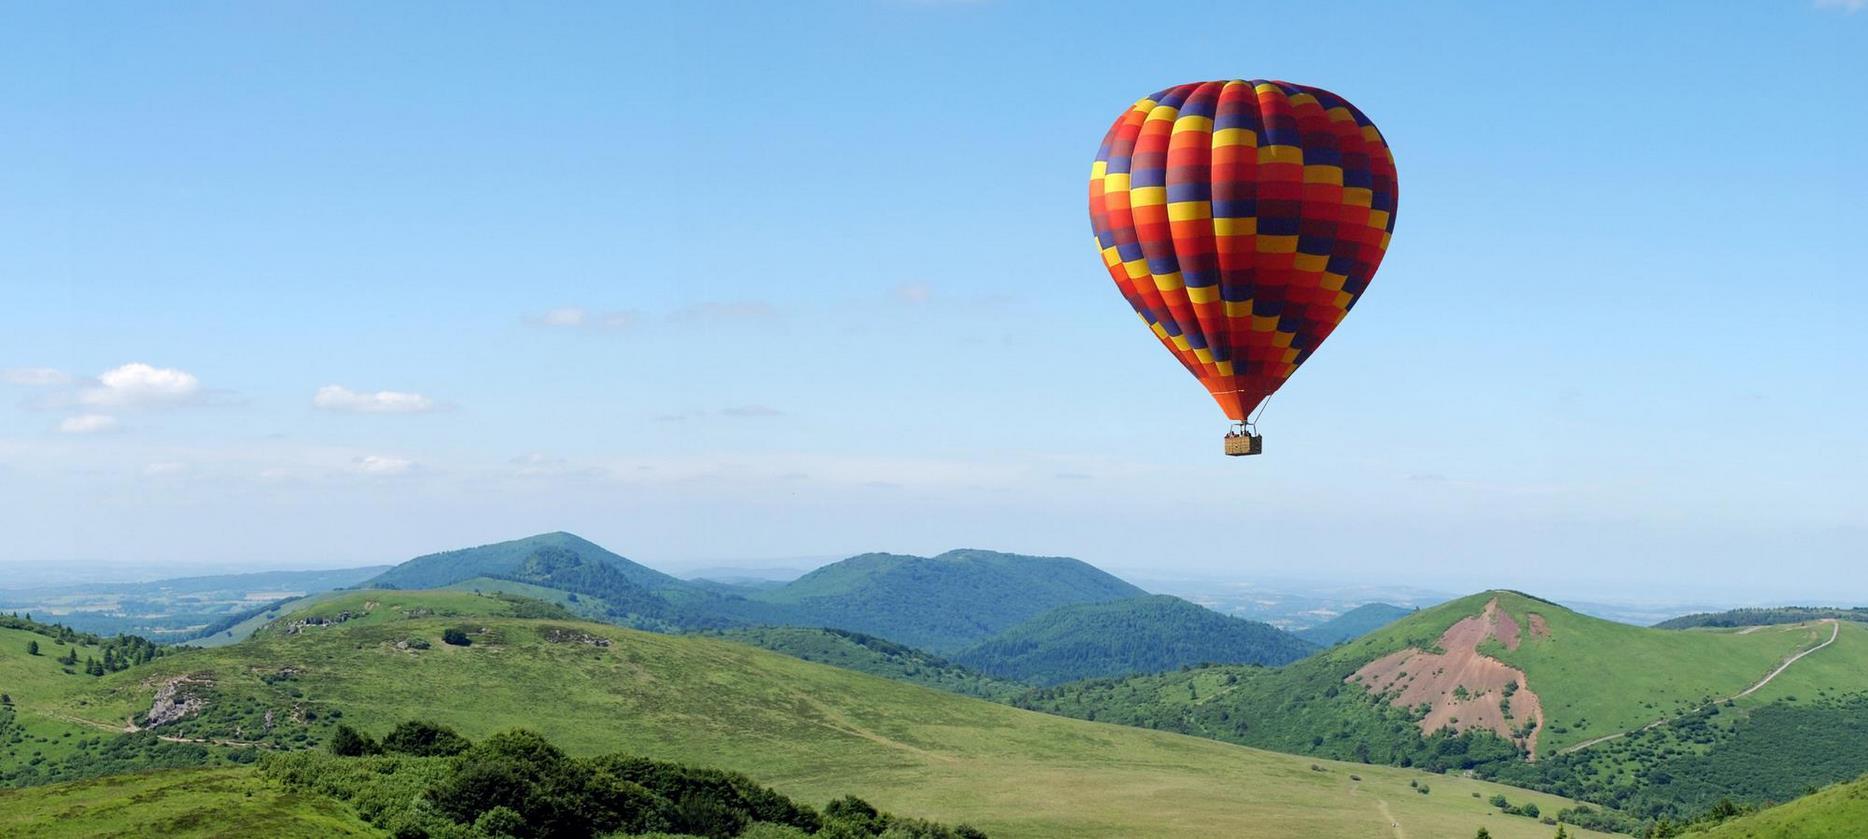 Hot air balloon in the Natural Park of the Volcanoes of Auvergne